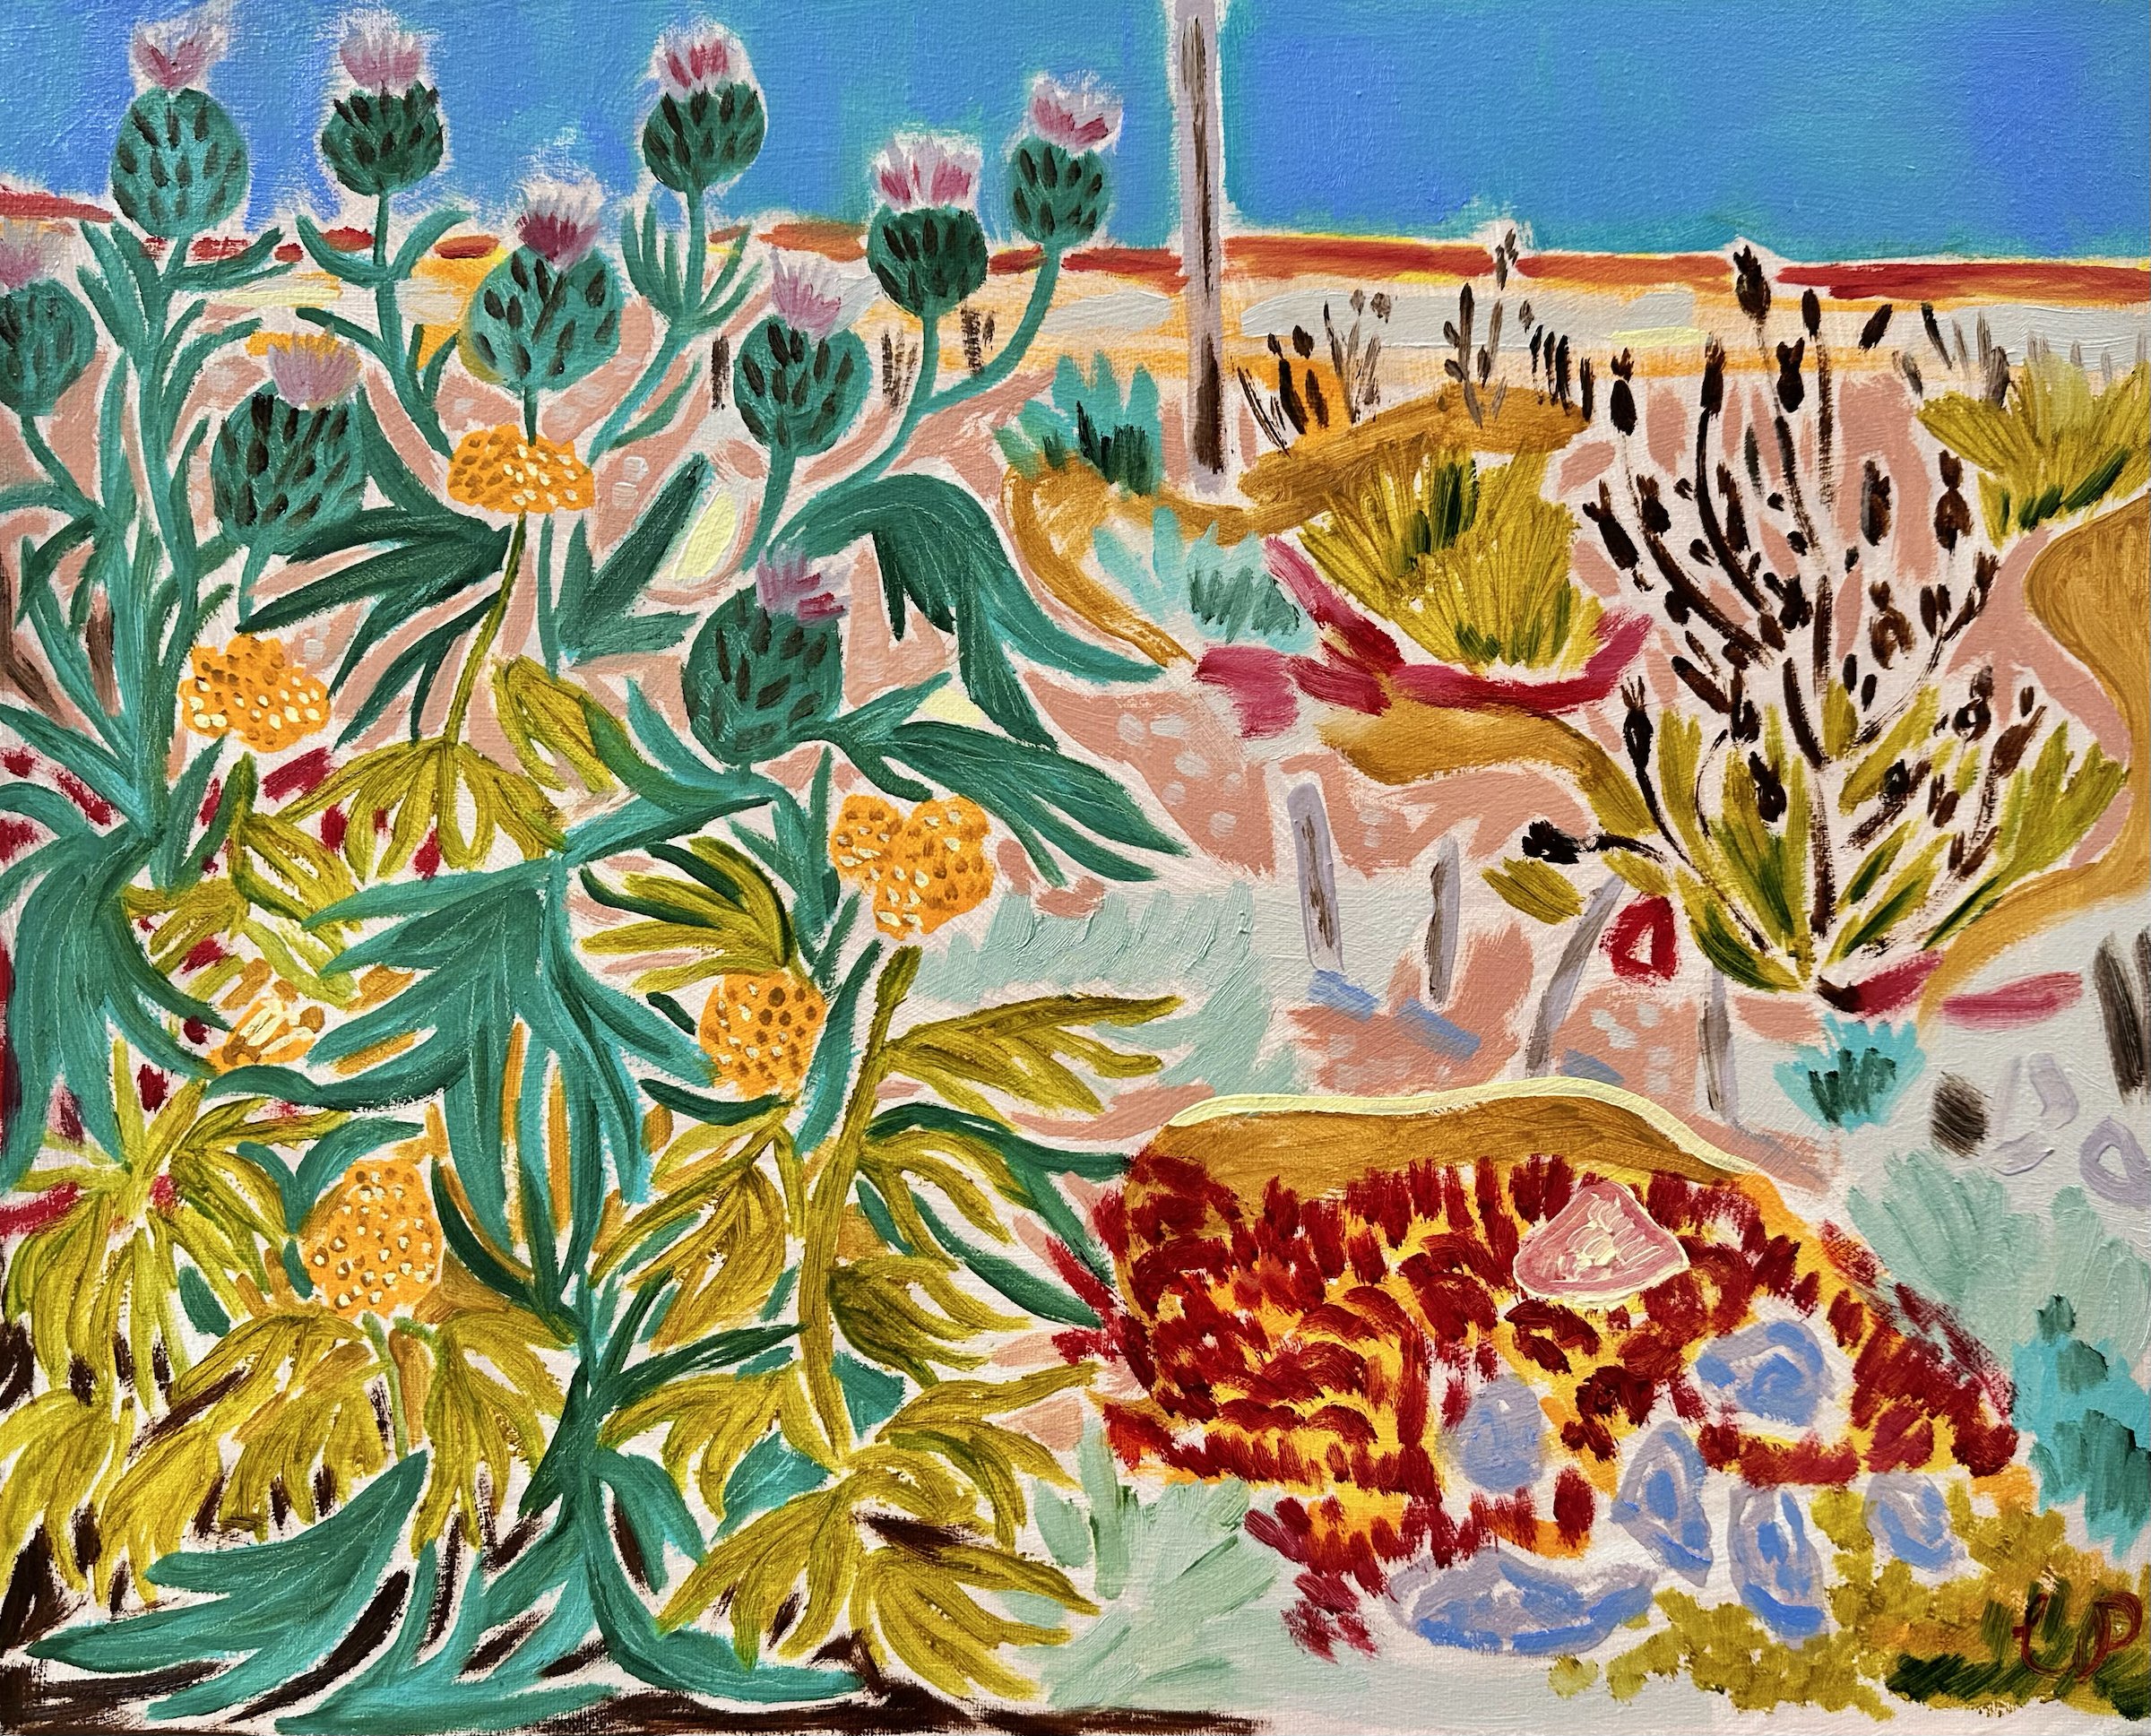  Title: Summer in Dungeness Size: 30 x 40cm Medium: Oil and flashe on canvas Price: £950 